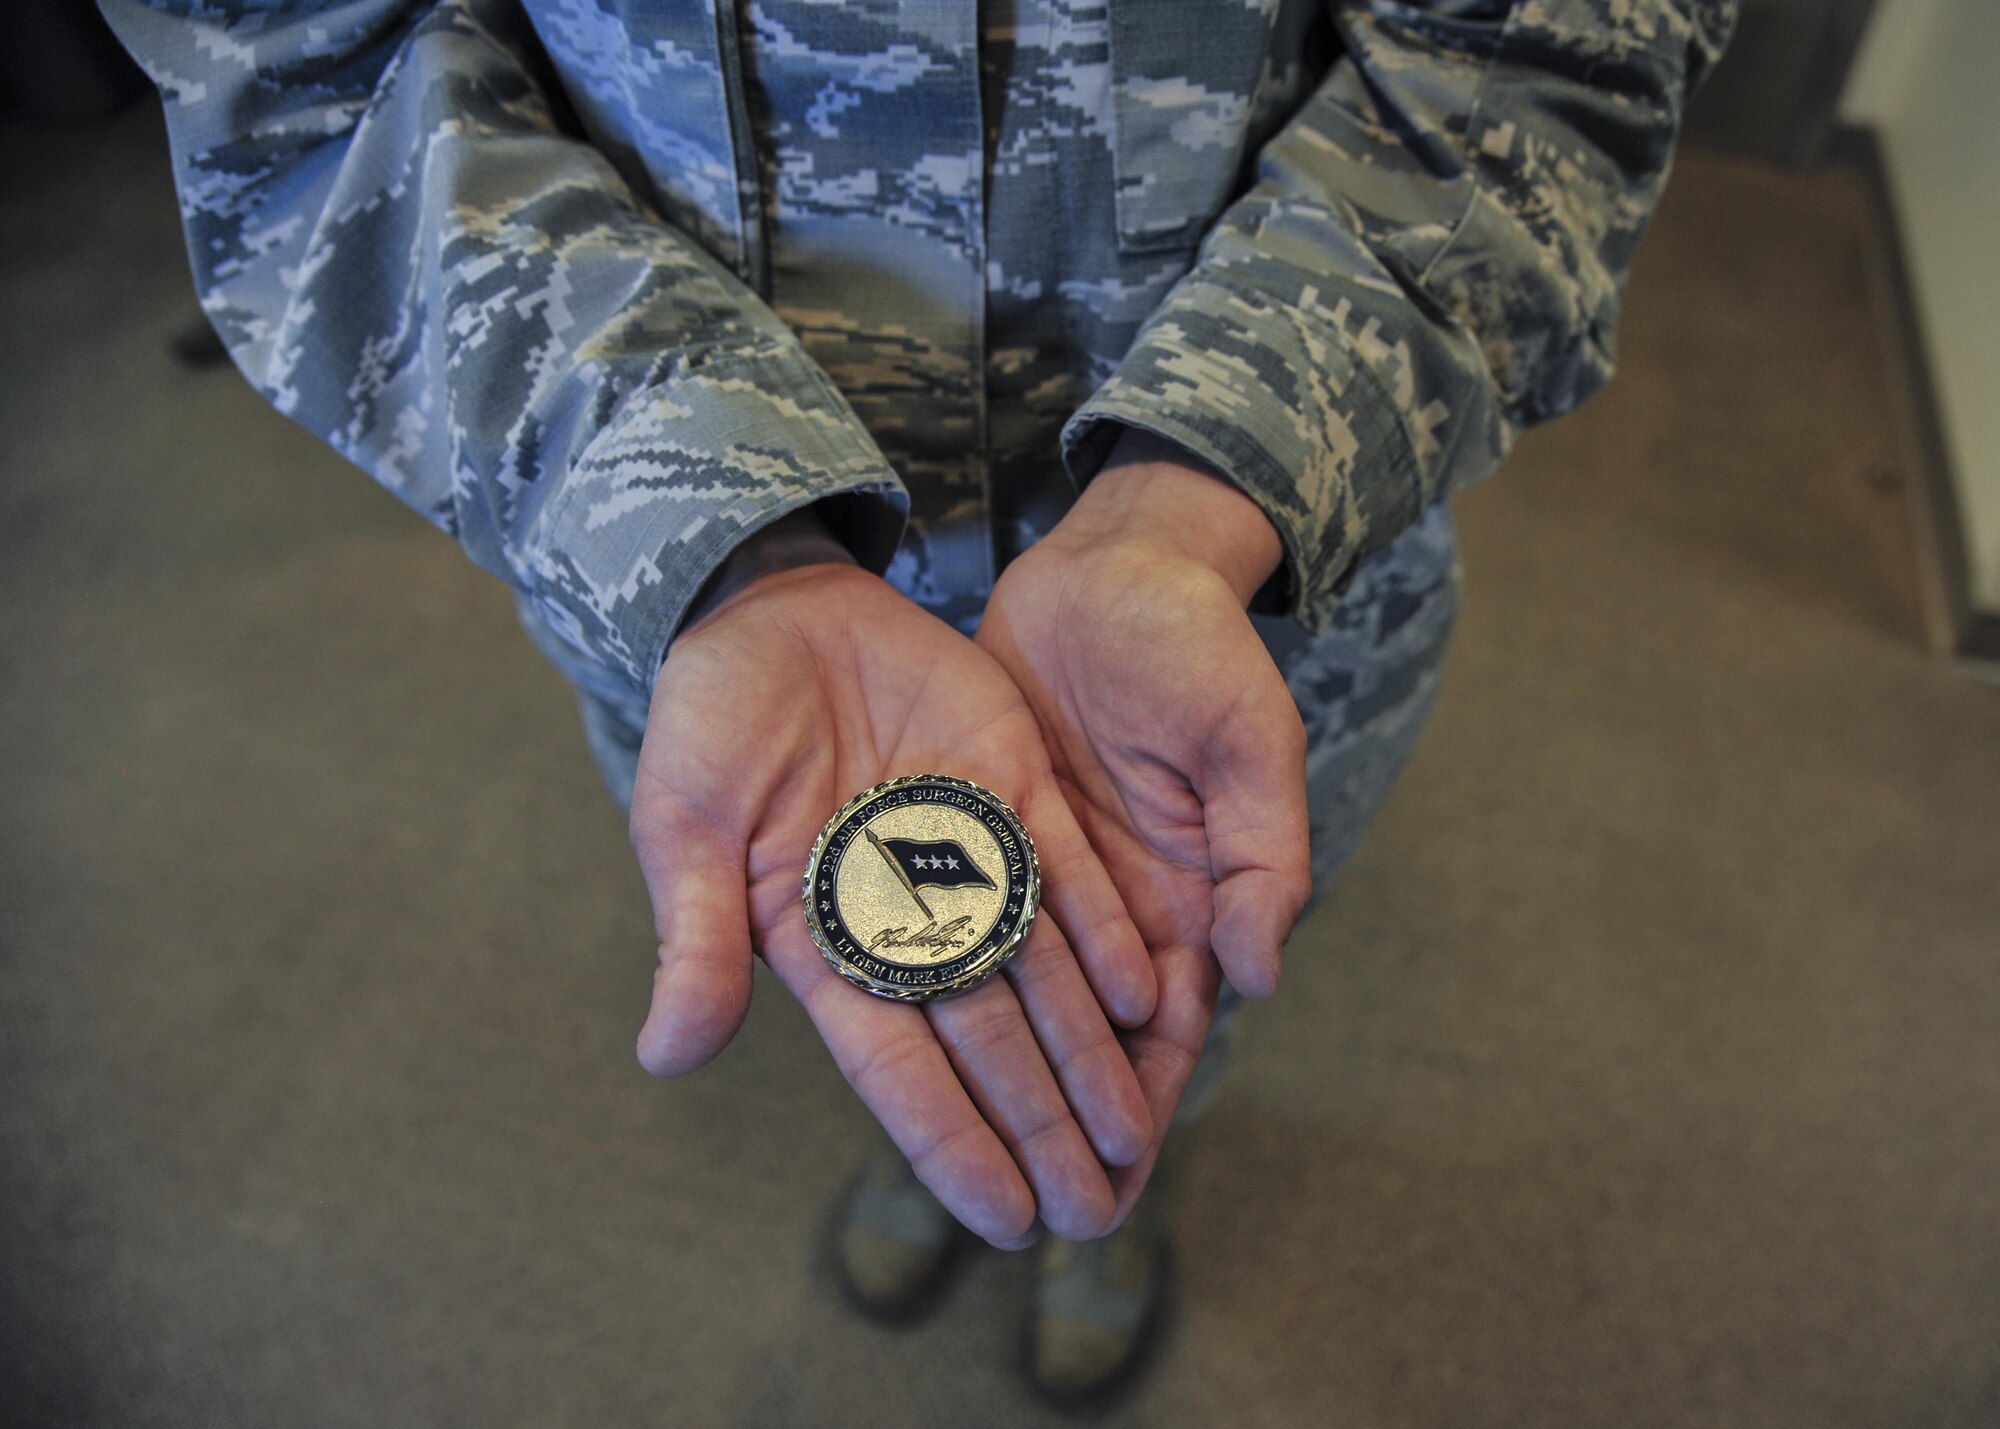 Lt. Gen. Mark Ediger, Surgeon General of the Air Force, presented Kirtland medics with the honorary three-star coin during his visit to Kirtland Air Force Base, New Mexico, March 2. Personnel receiving the coin were recognized by their commanders for being outstanding professionals in their career fields. 
